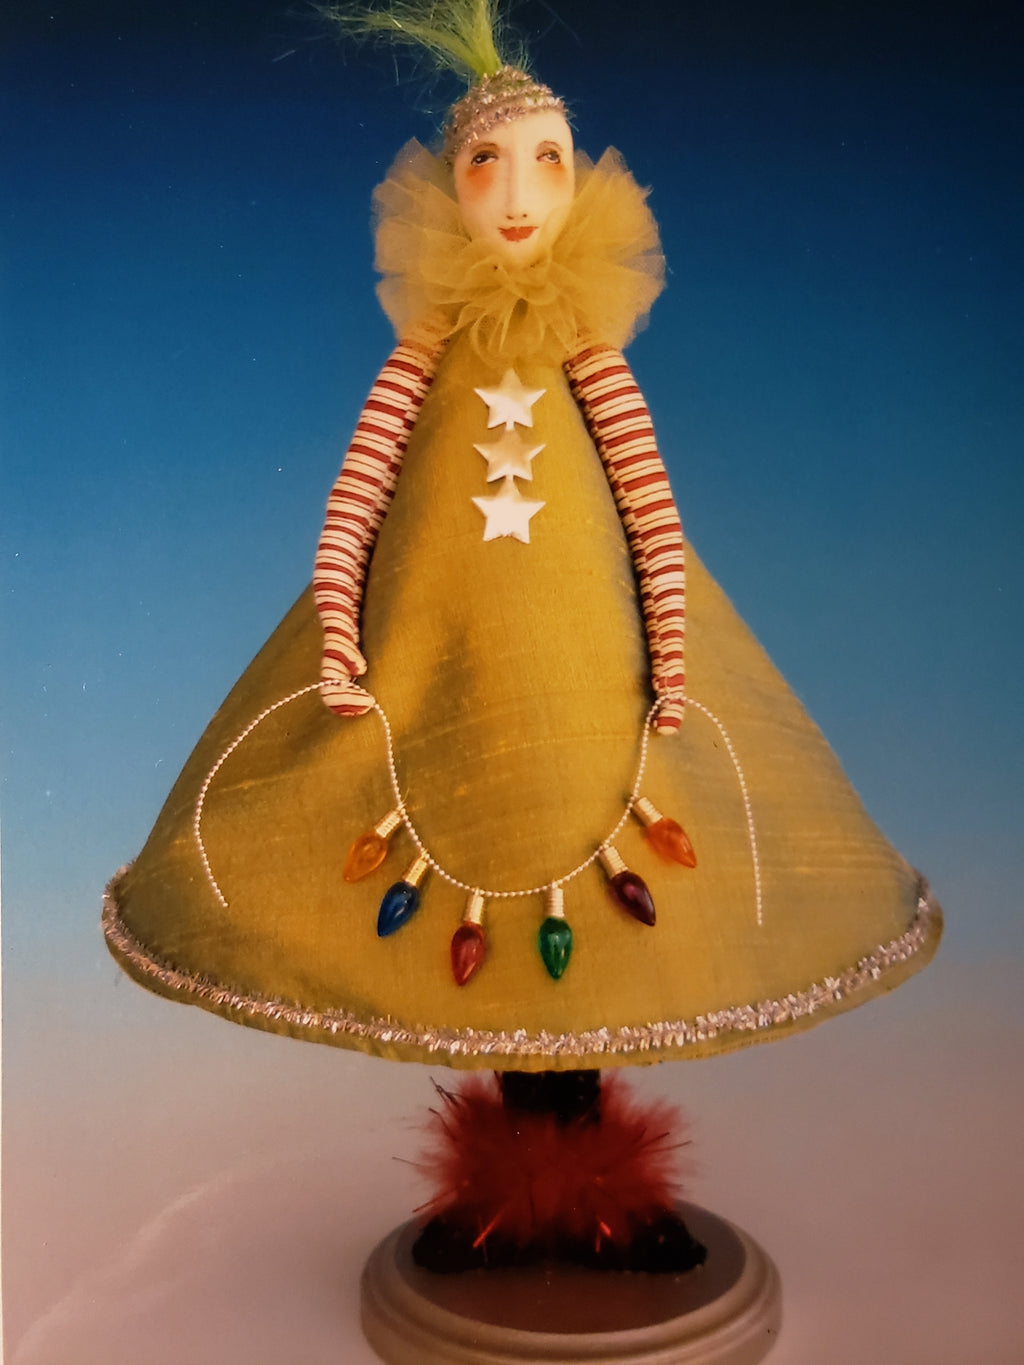 TREESA - Pattern for Cloth Art Doll by Cindee Moyer